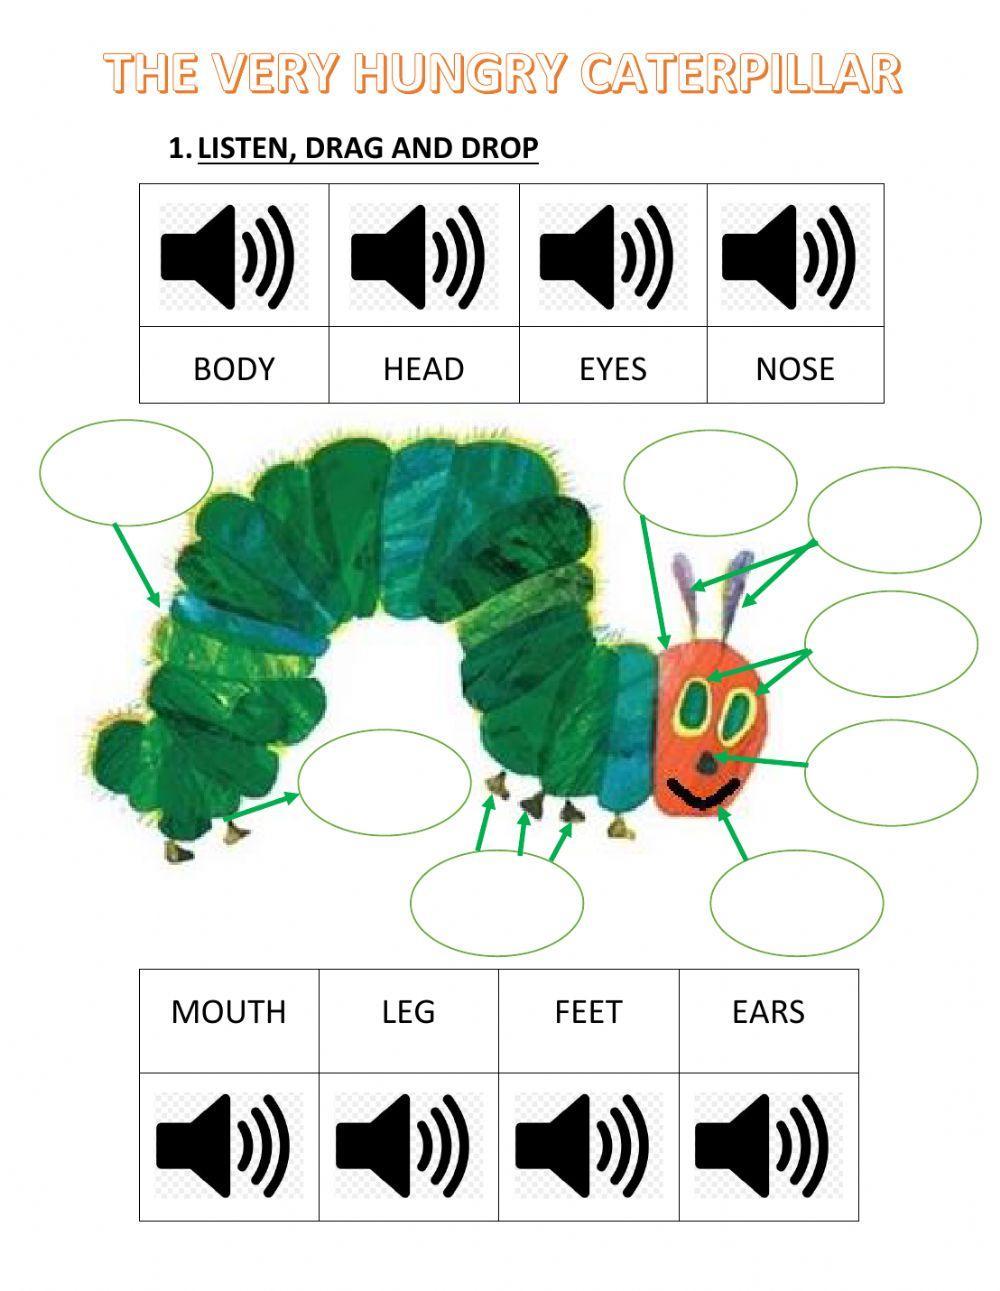 The very hungry caterpillar - Body